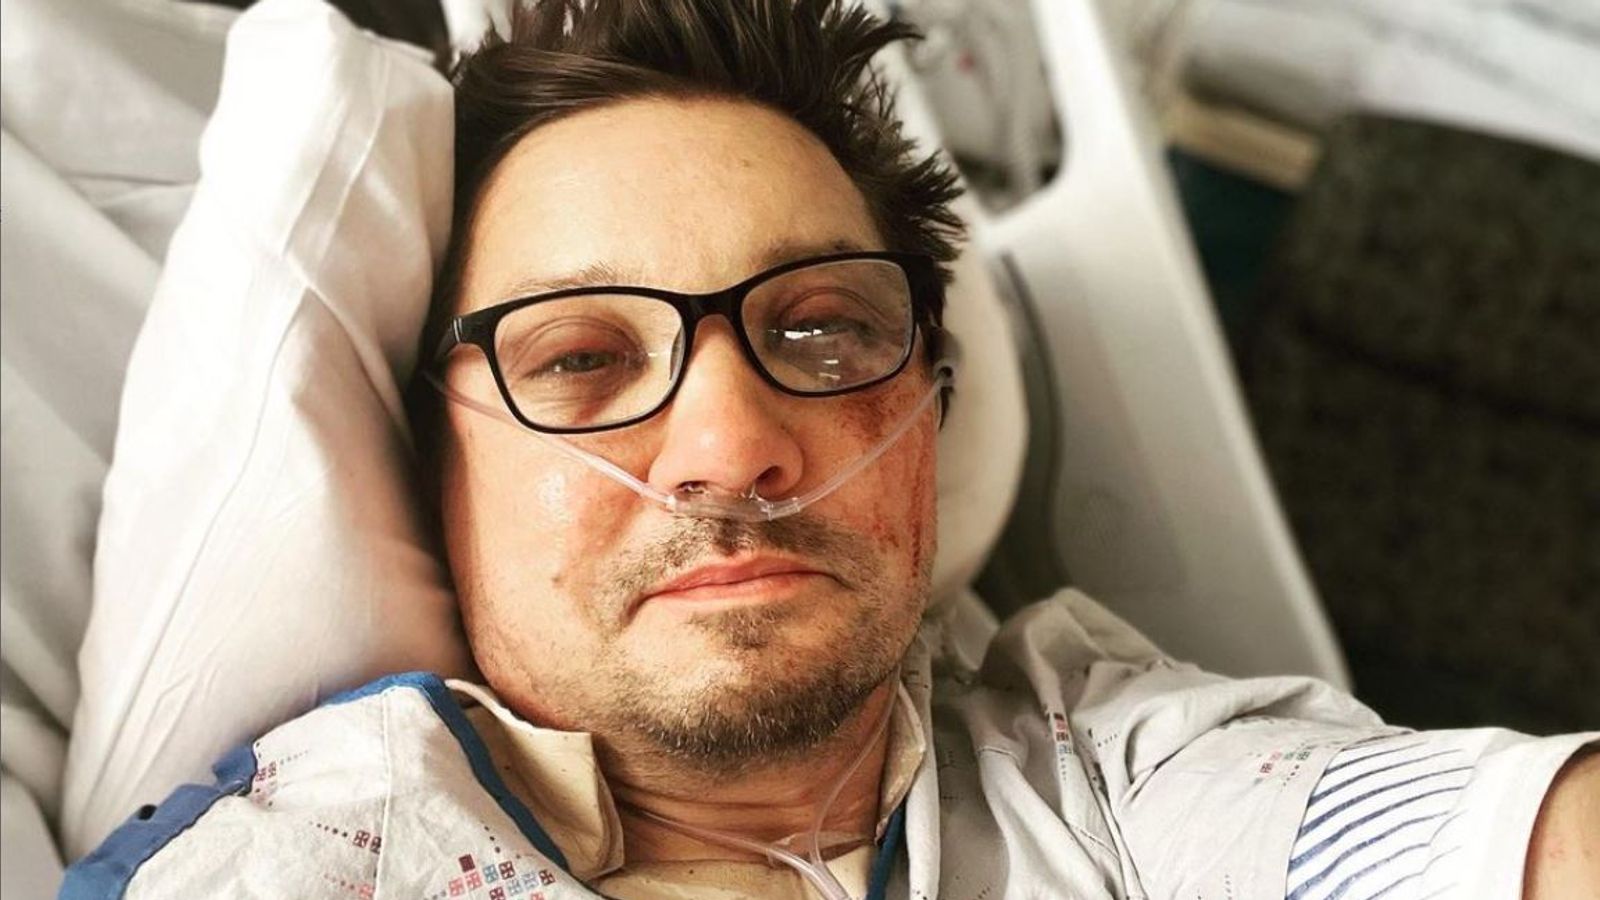 Jeremy Renner: Police footage shows medics treating Marvel actor after snow plough accident